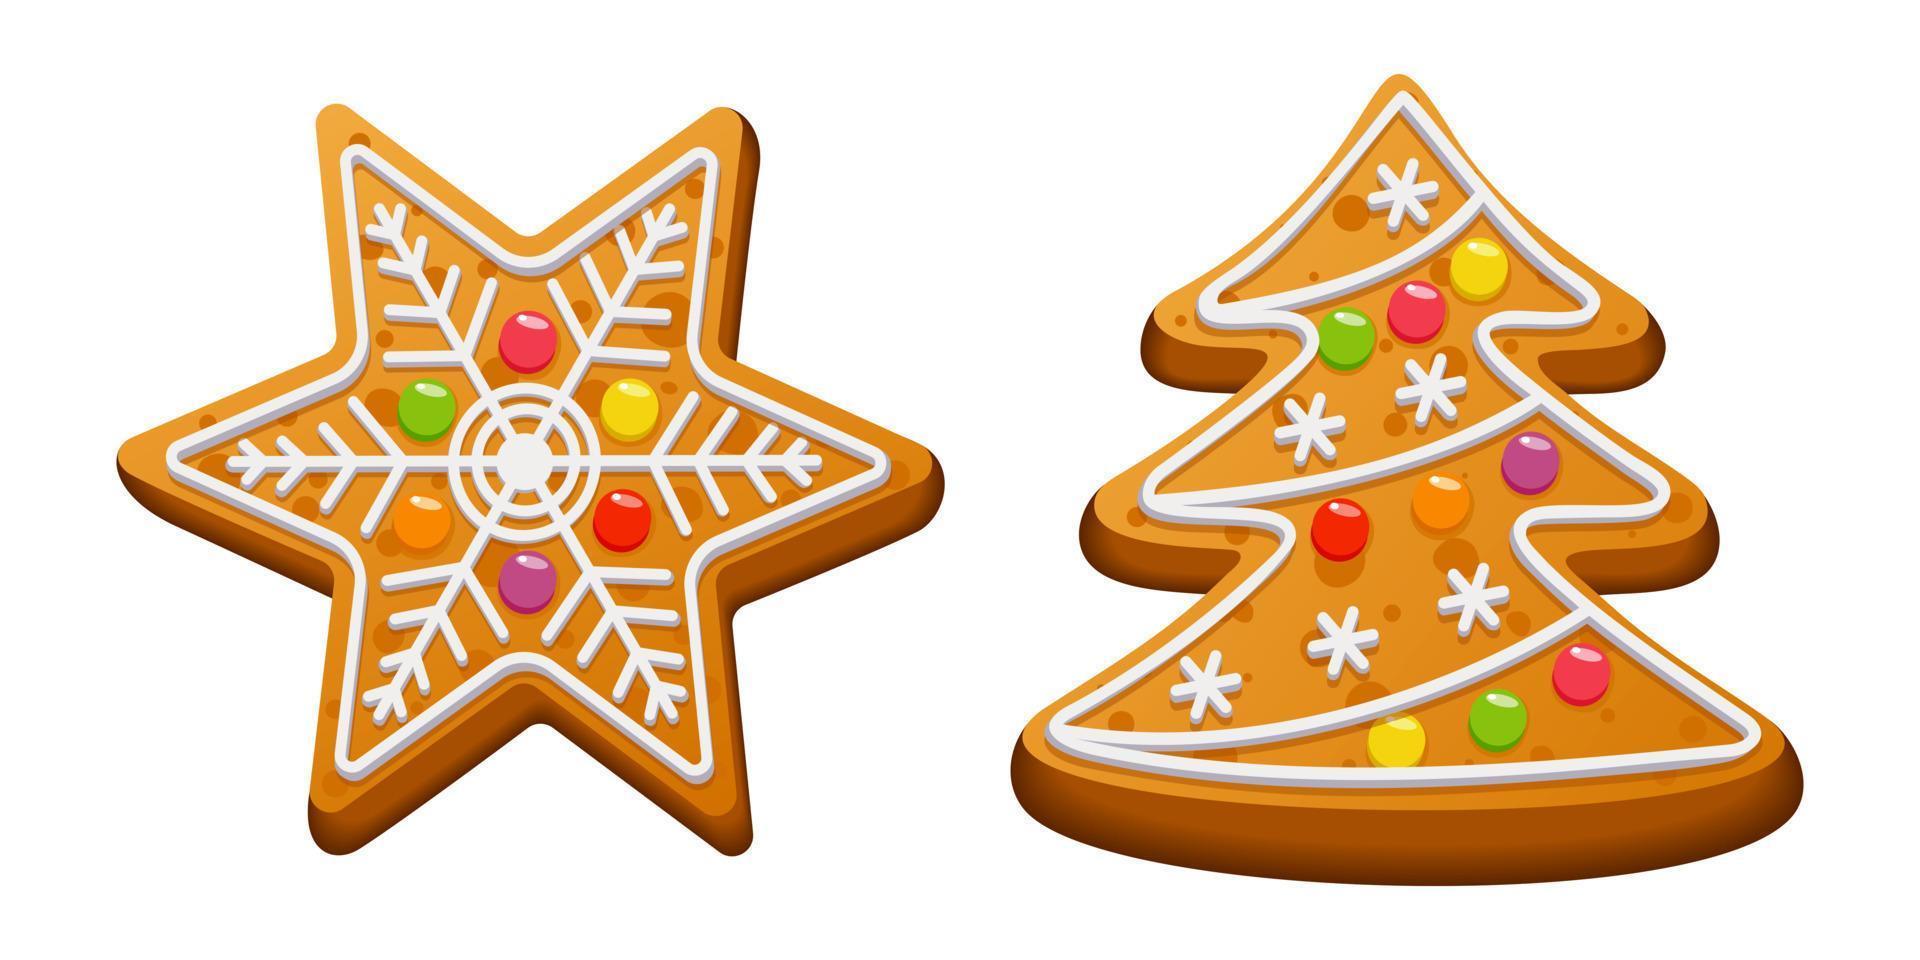 Gingerbread star and Christmas tree. Homemade holiday cookies for Christmas. Sweet food. Vector illustration.